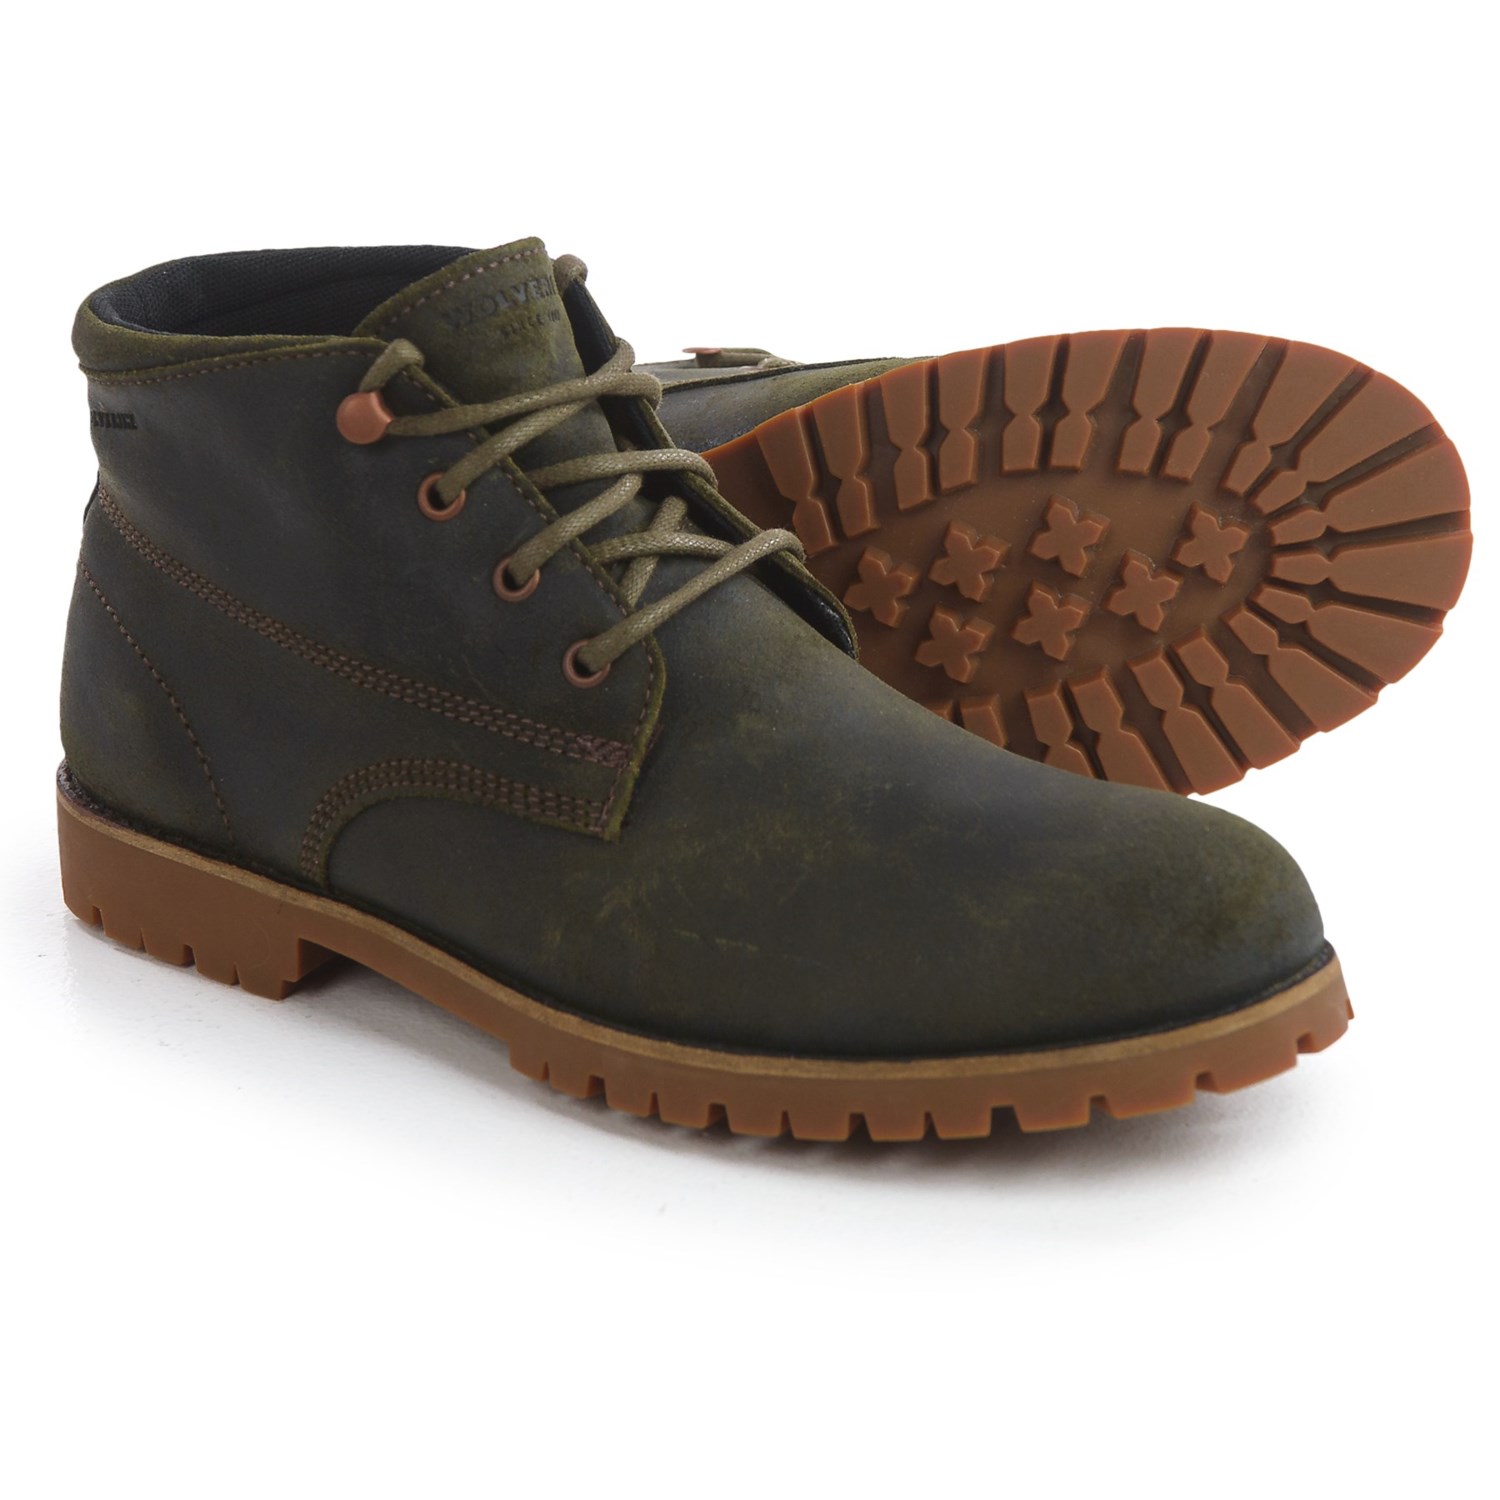 Wolverine No. 1883 Cort Boots (For Men) - Save 56%